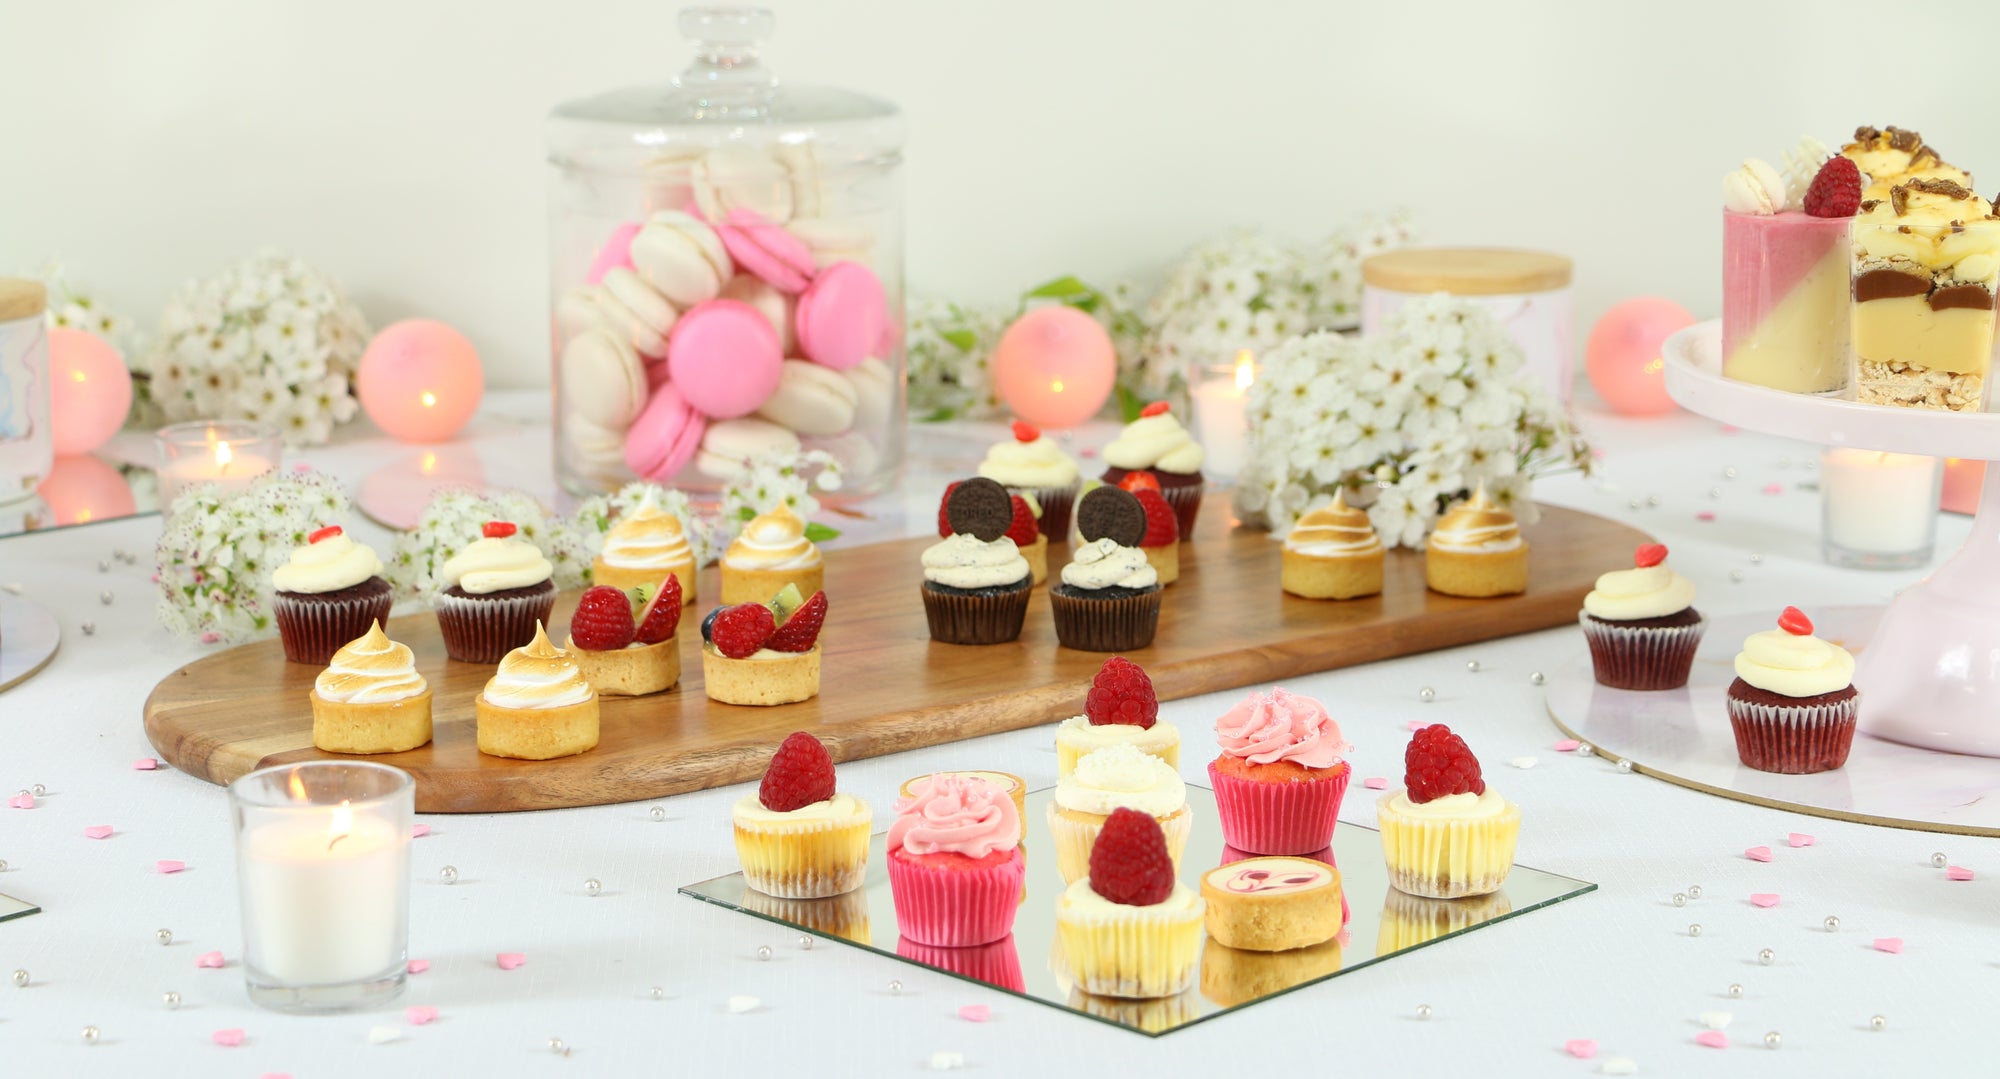 Impress Your Guests with a Mini Dessert Buffet at Your Next Special Event